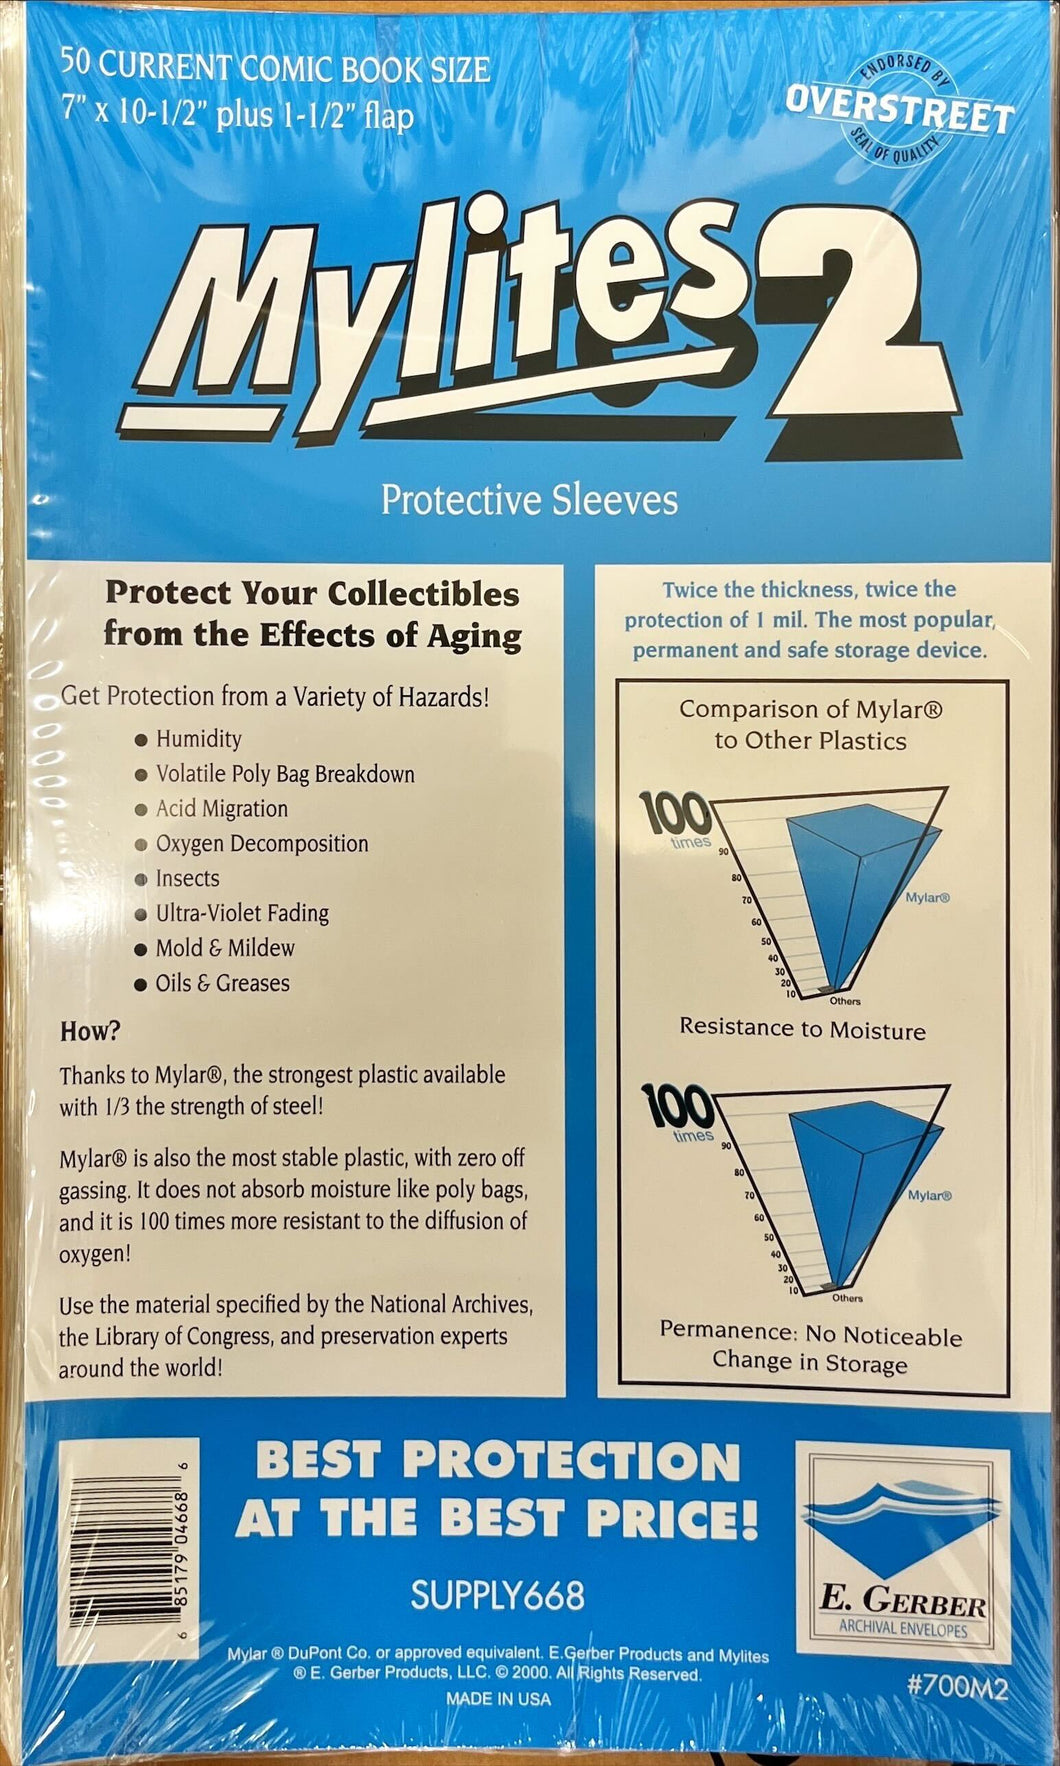 50 Current Comic Book Size Mylites Sleeves (7x10.5 Current)